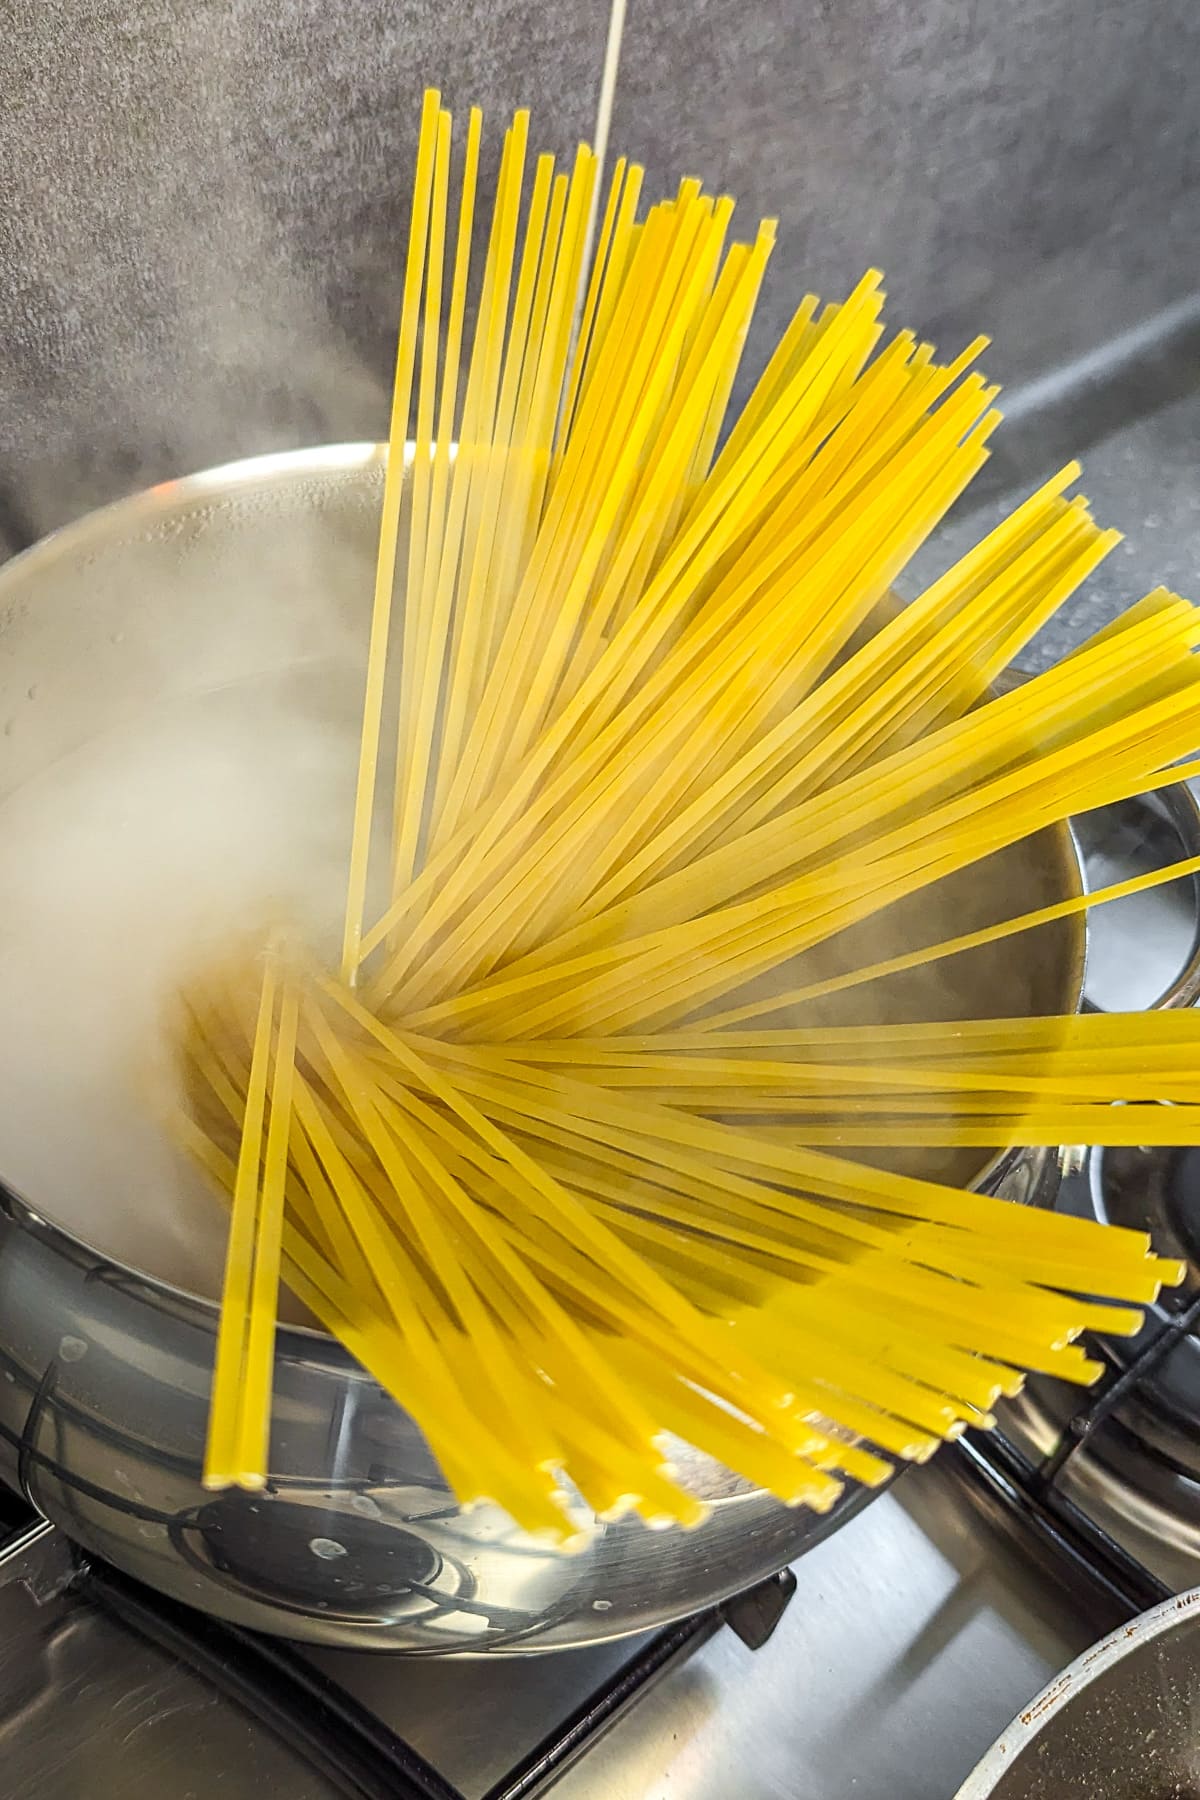 Uncooked spaghetti submerged in boiling water in a stainless steel pot on a stovetop.